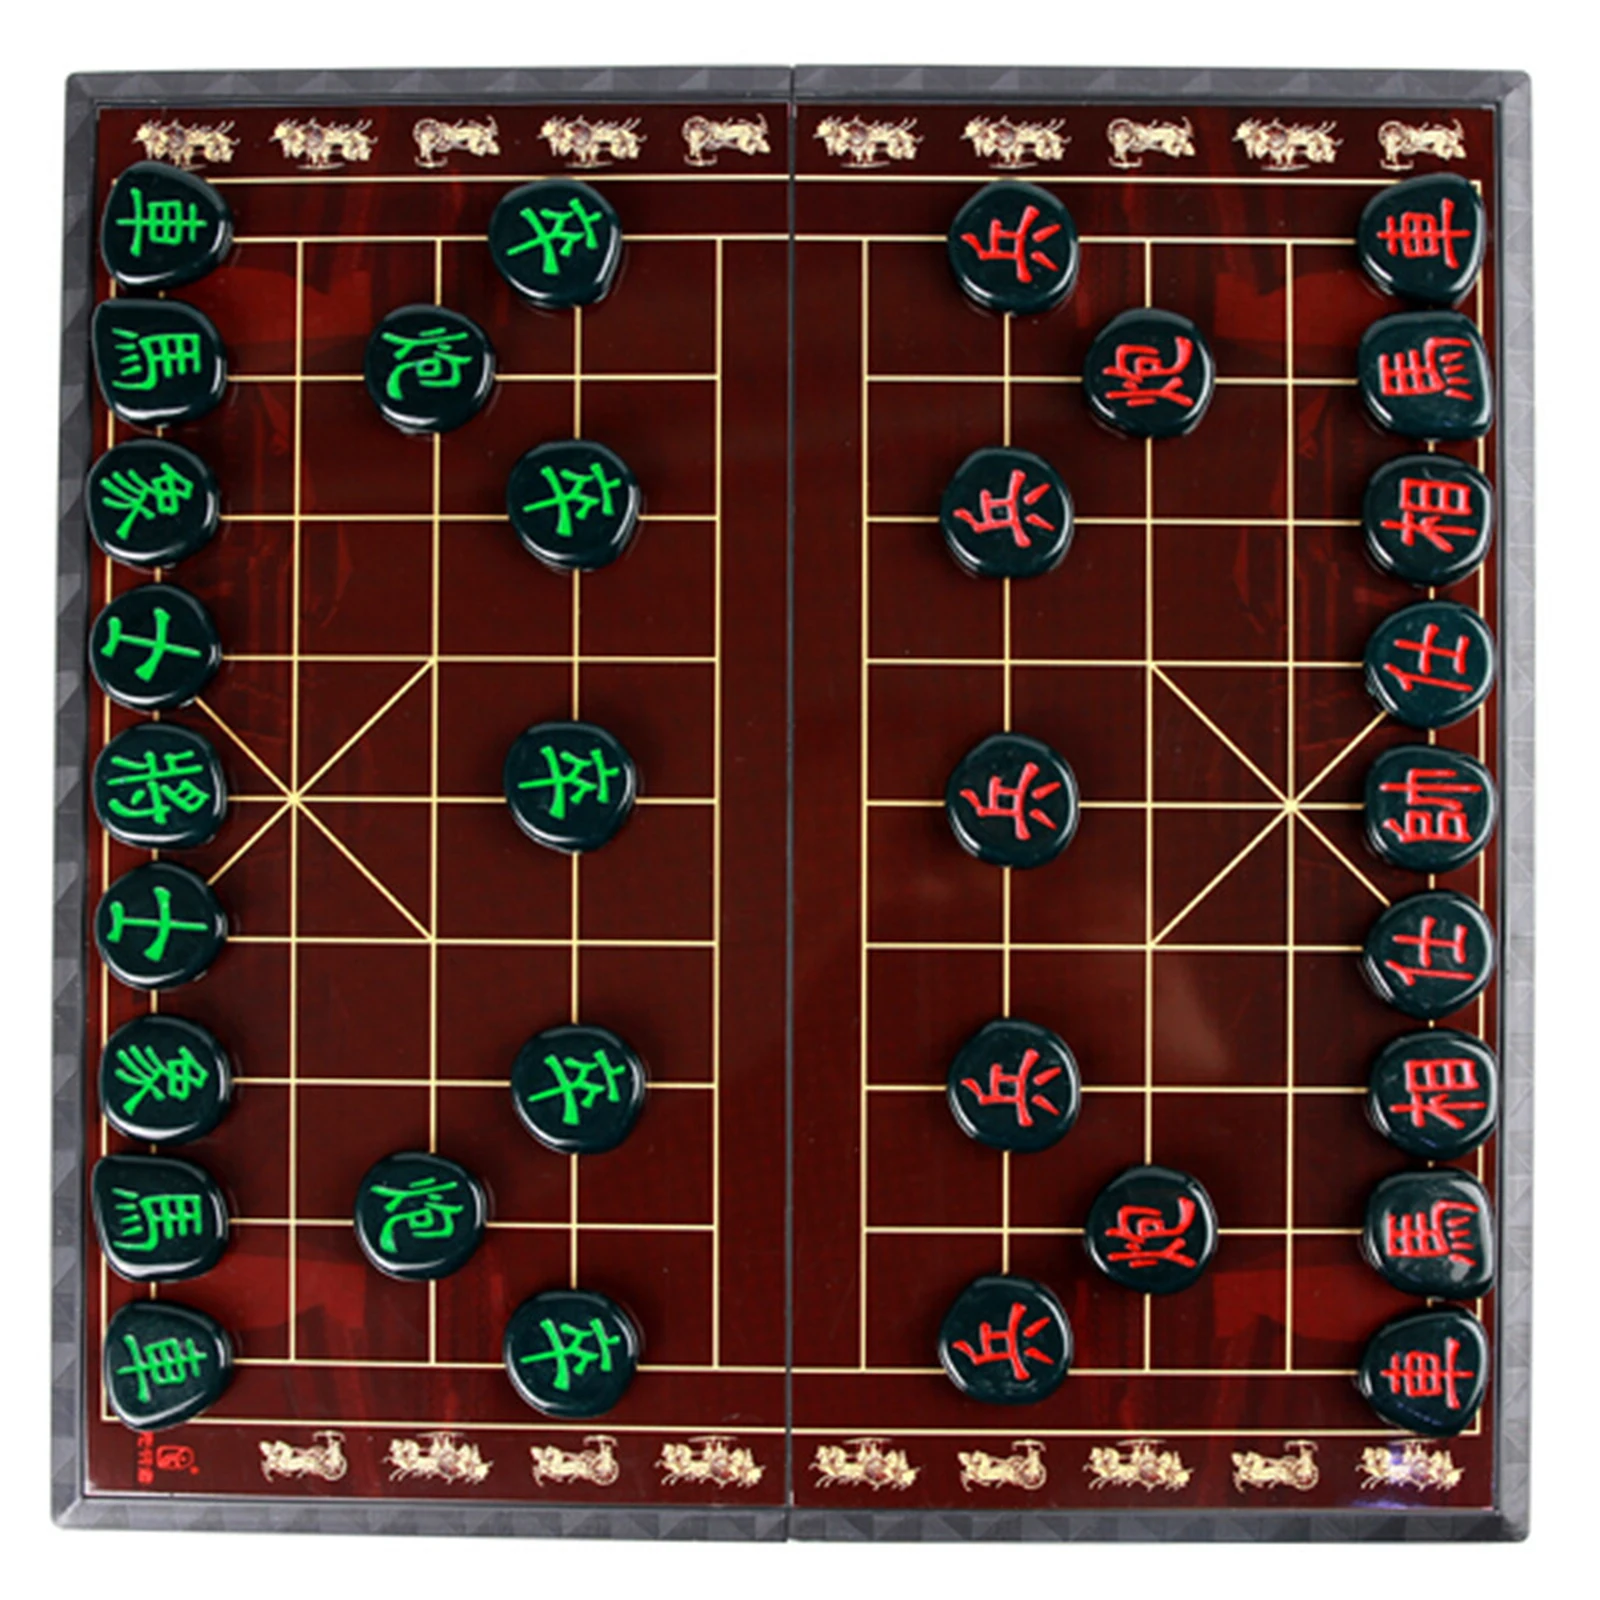 Large Chinese Chess Magnetic Xiangqi Set Large Size Magnetic Piece Board Traditional Xiangqi for Games Set Travel Board